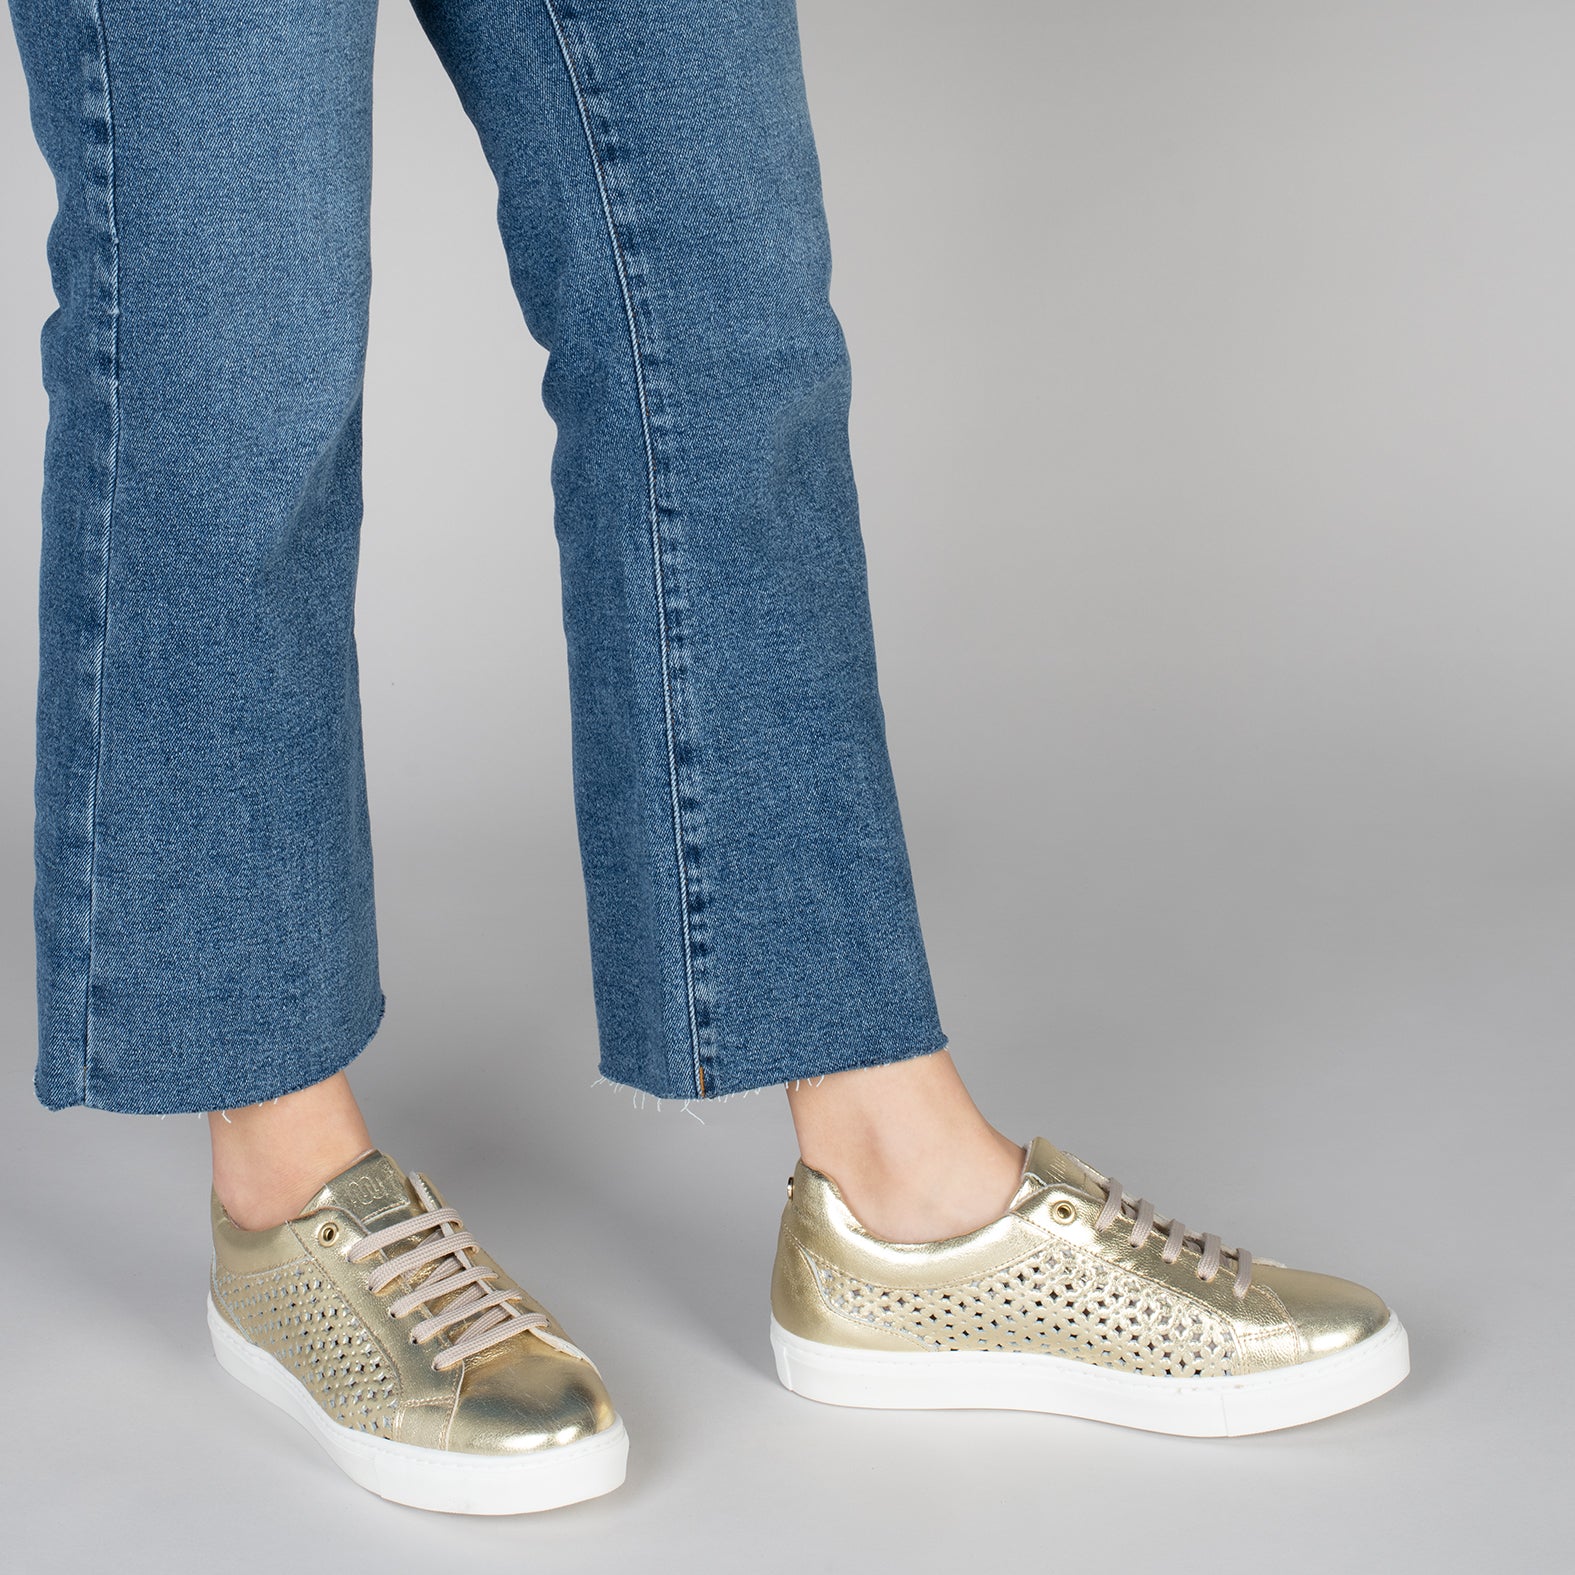 BREATHE – GOLDEN nappa sneakers with dye-cutting design